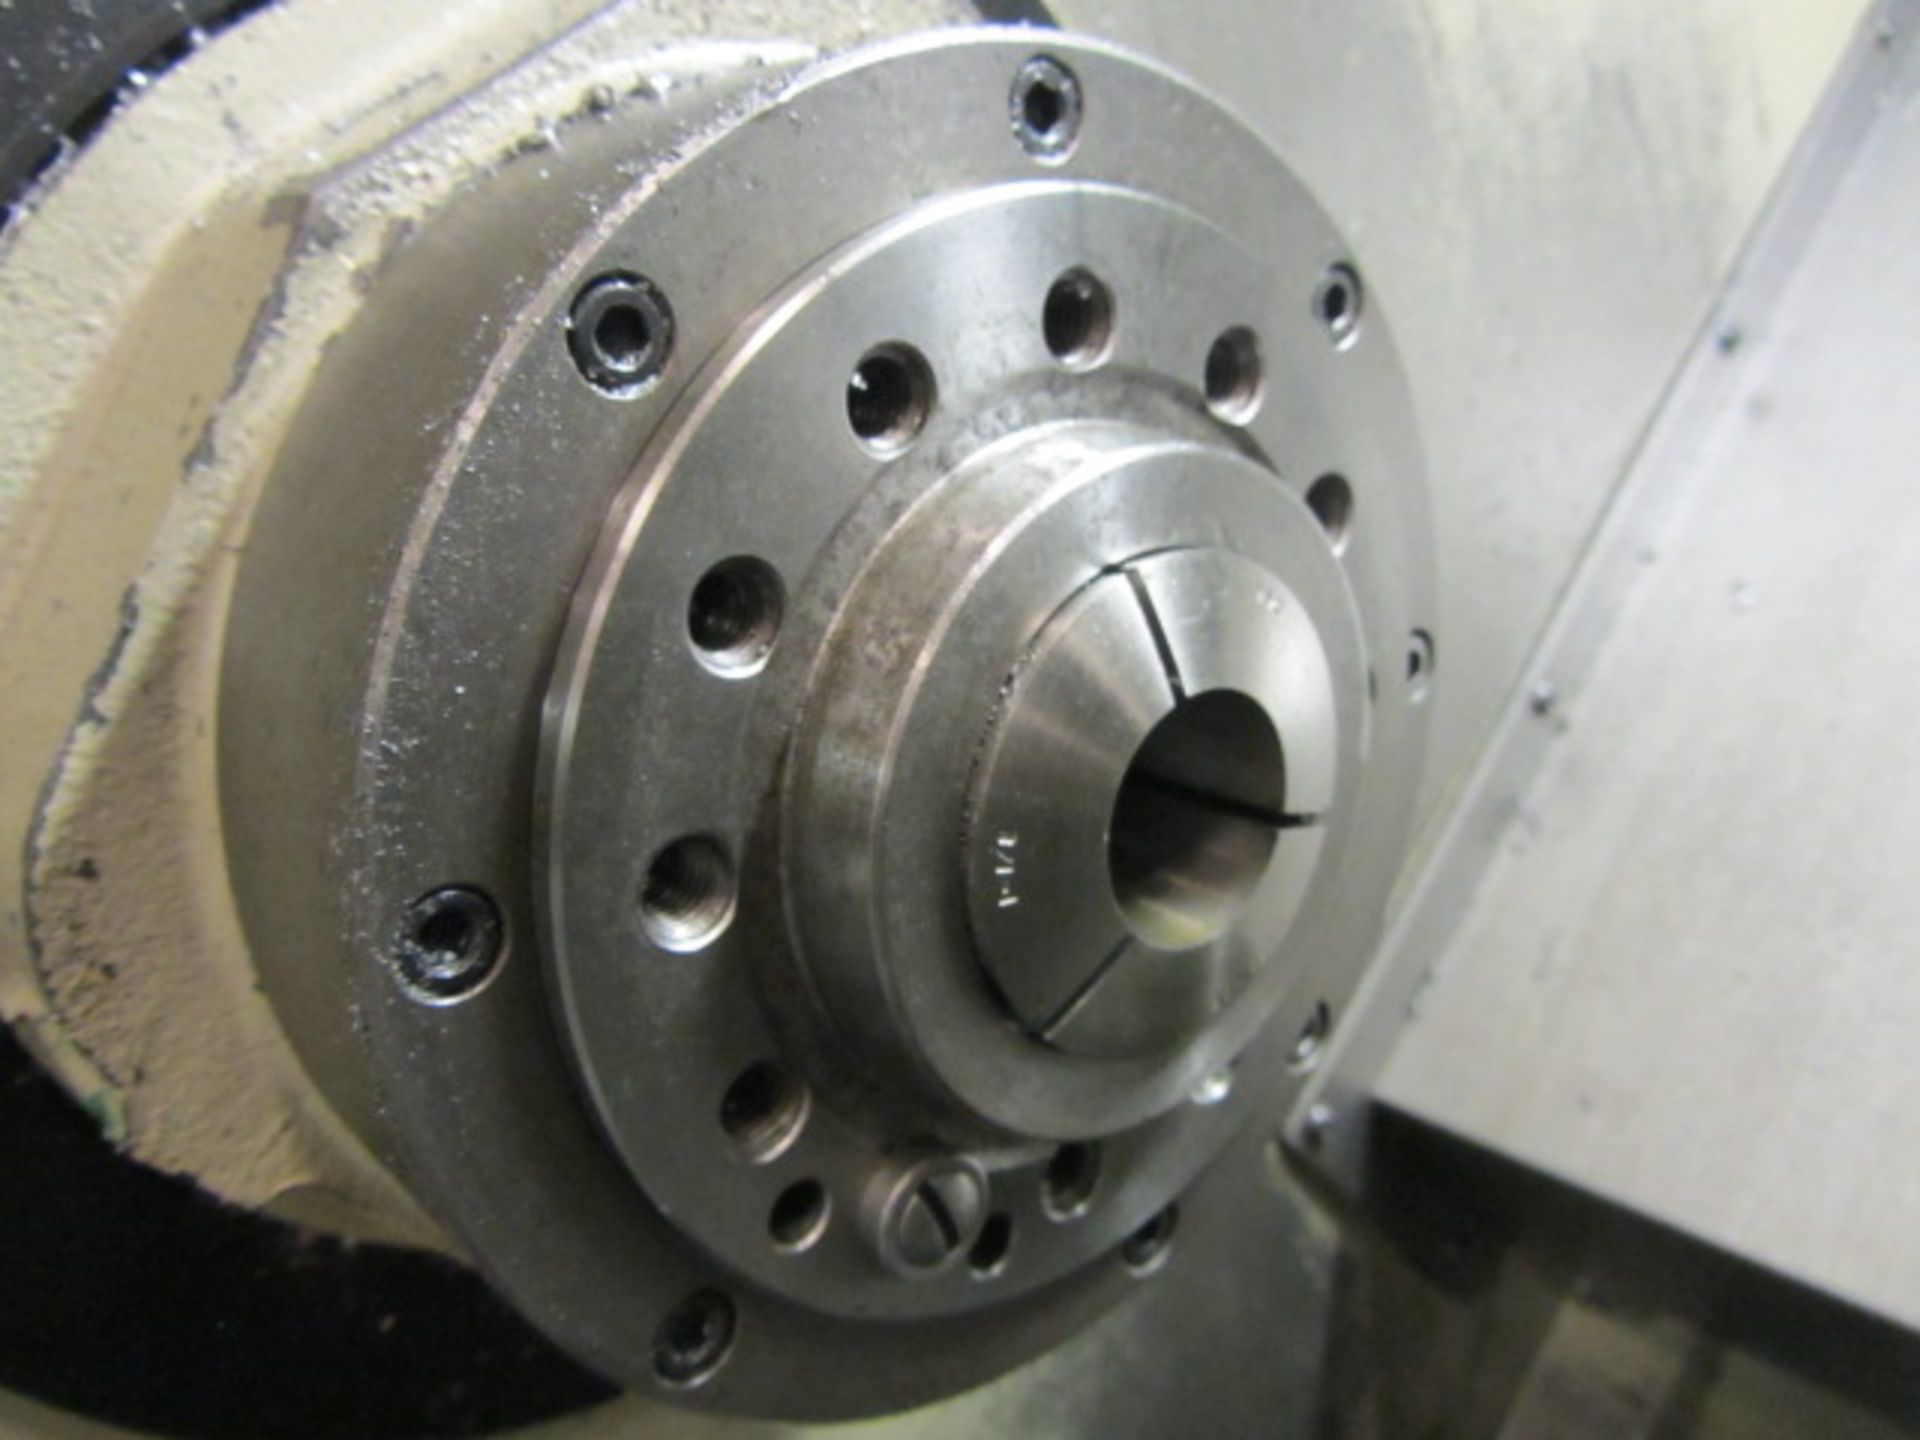 Hardinge Conquest T42 CNC Turning Center with 6'' Chuck, Collet Spindle Nose, Spindle Speeds to 5000 - Bild 5 aus 9